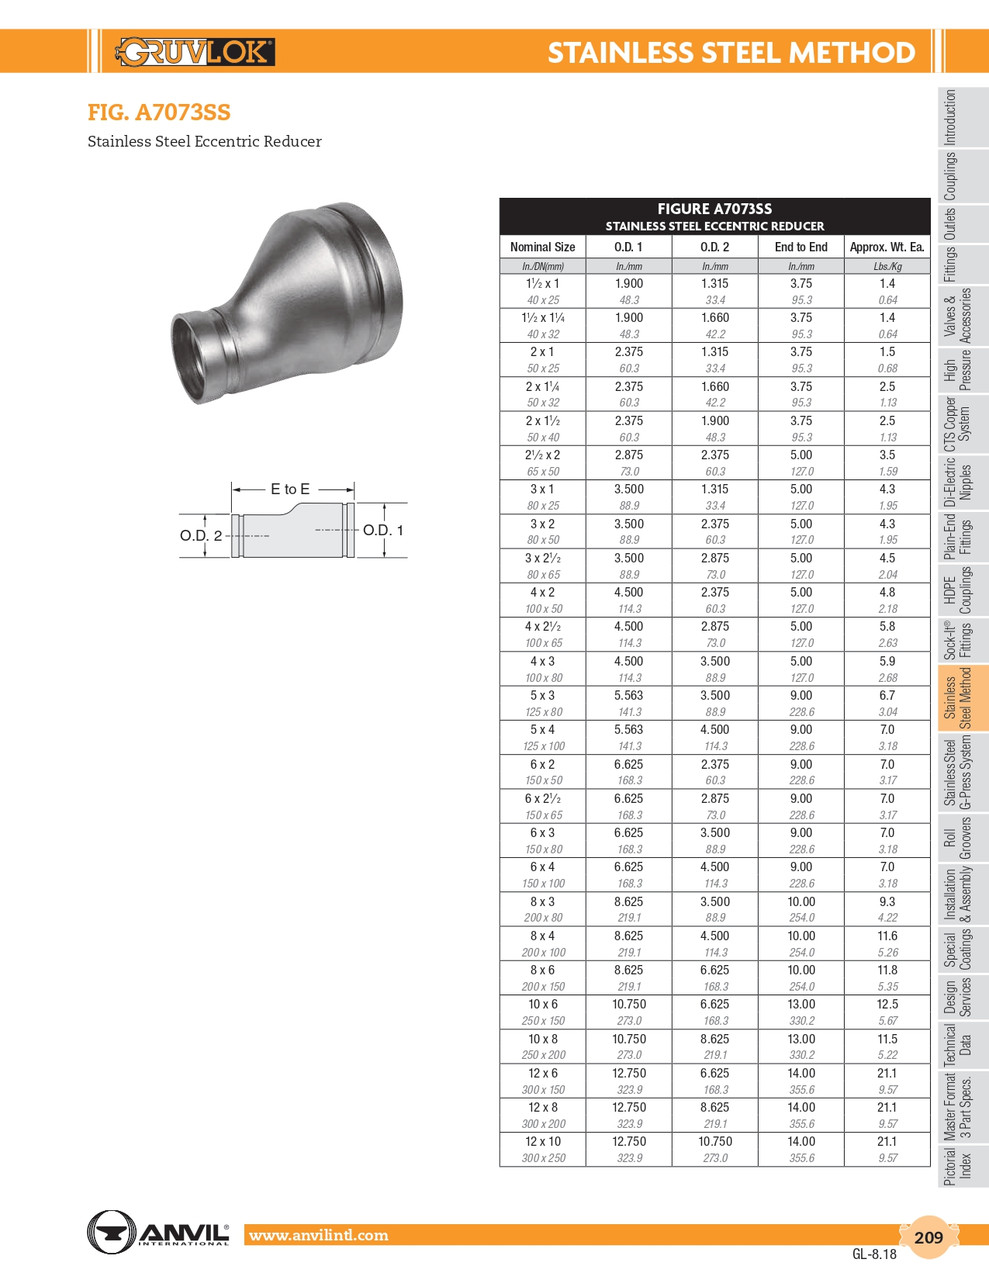 Fig. A7073SS Stainless Eccentric Reducer 1-1/2 x 1-1/4"